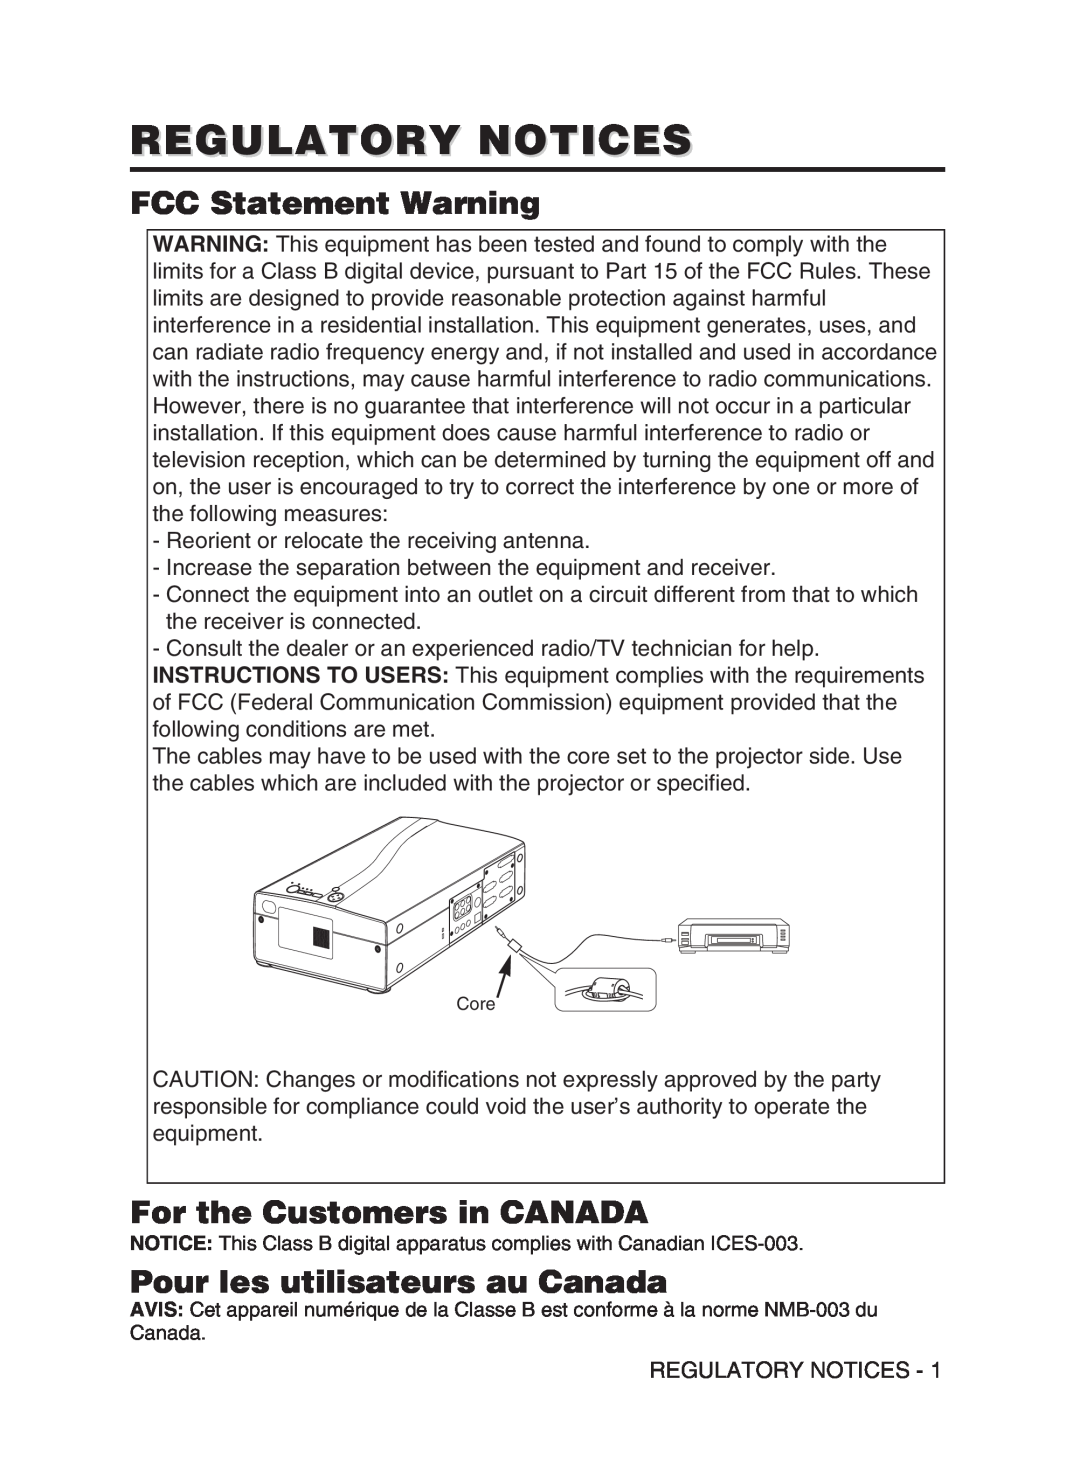 Hitachi CP-SX5600W Regulatory Notices, FCC Statement Warning, For the Customers in CANADA, Pour les utilisateurs au Canada 